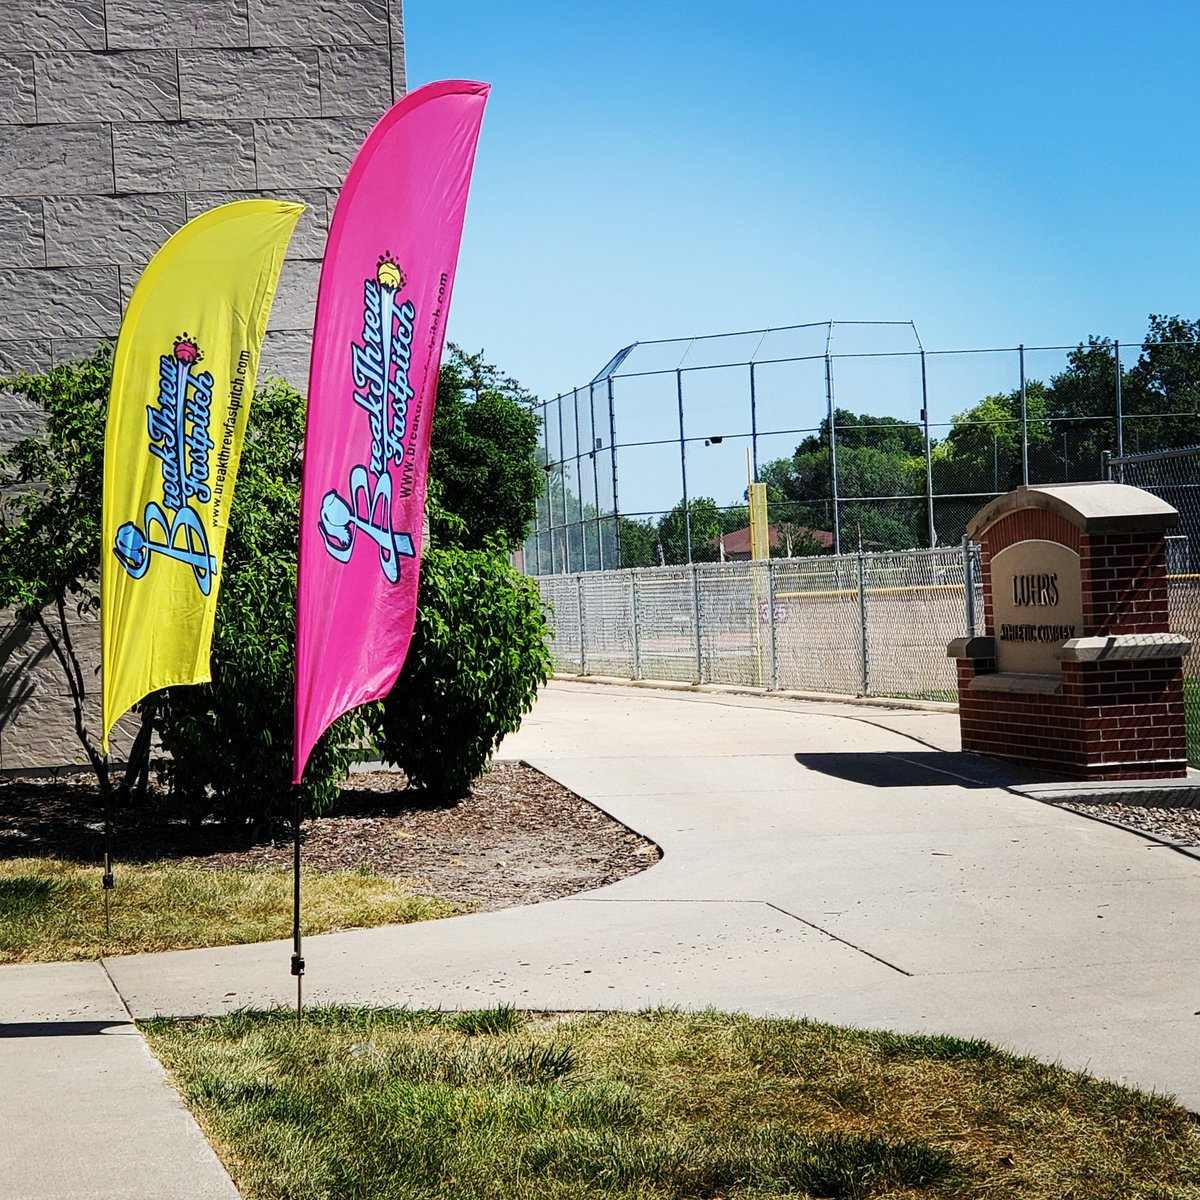 Tomorrow is THE day! Opening day of SUMMER SCHOOL! 🥳 We can't wait to spend a couple of FUN-filled day getting BETTER with all you pitchers and catchers! See you SOON!